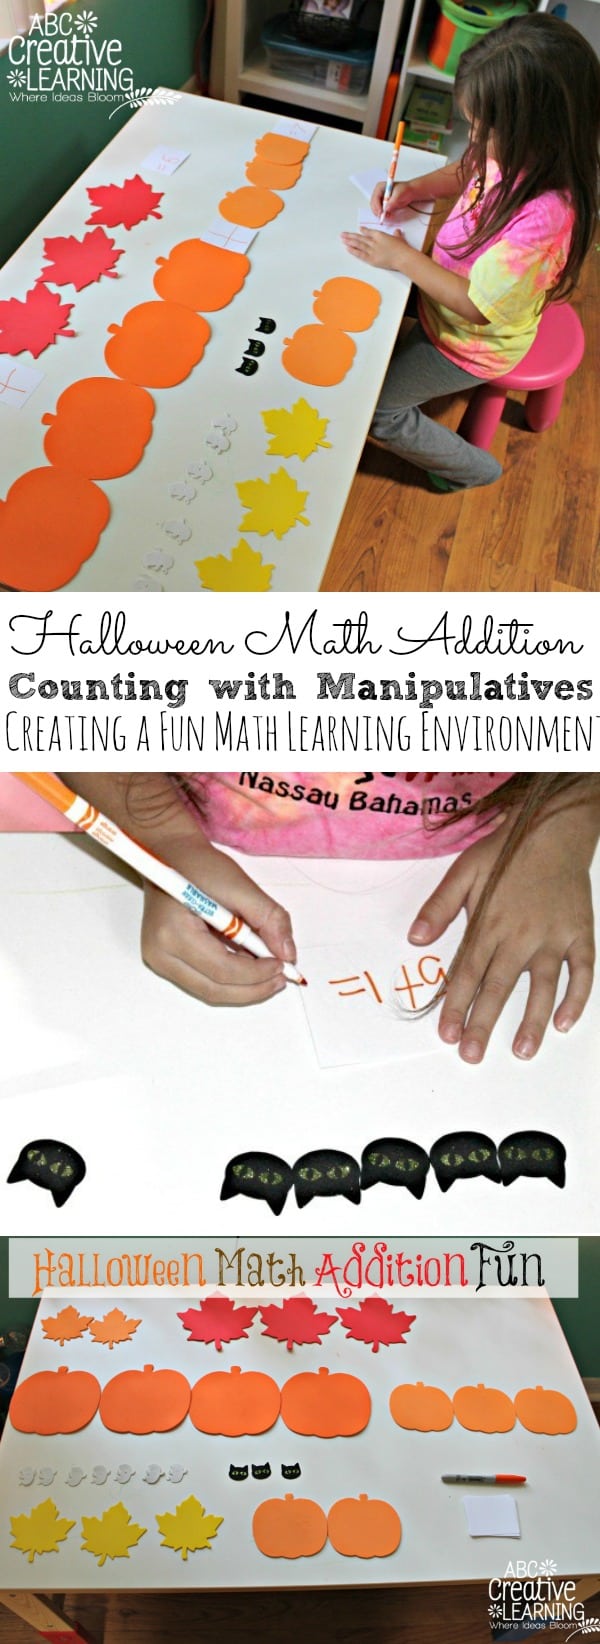 Halloween Math Addition Fun | Counting With Manipulatives - simplytodaylife.com